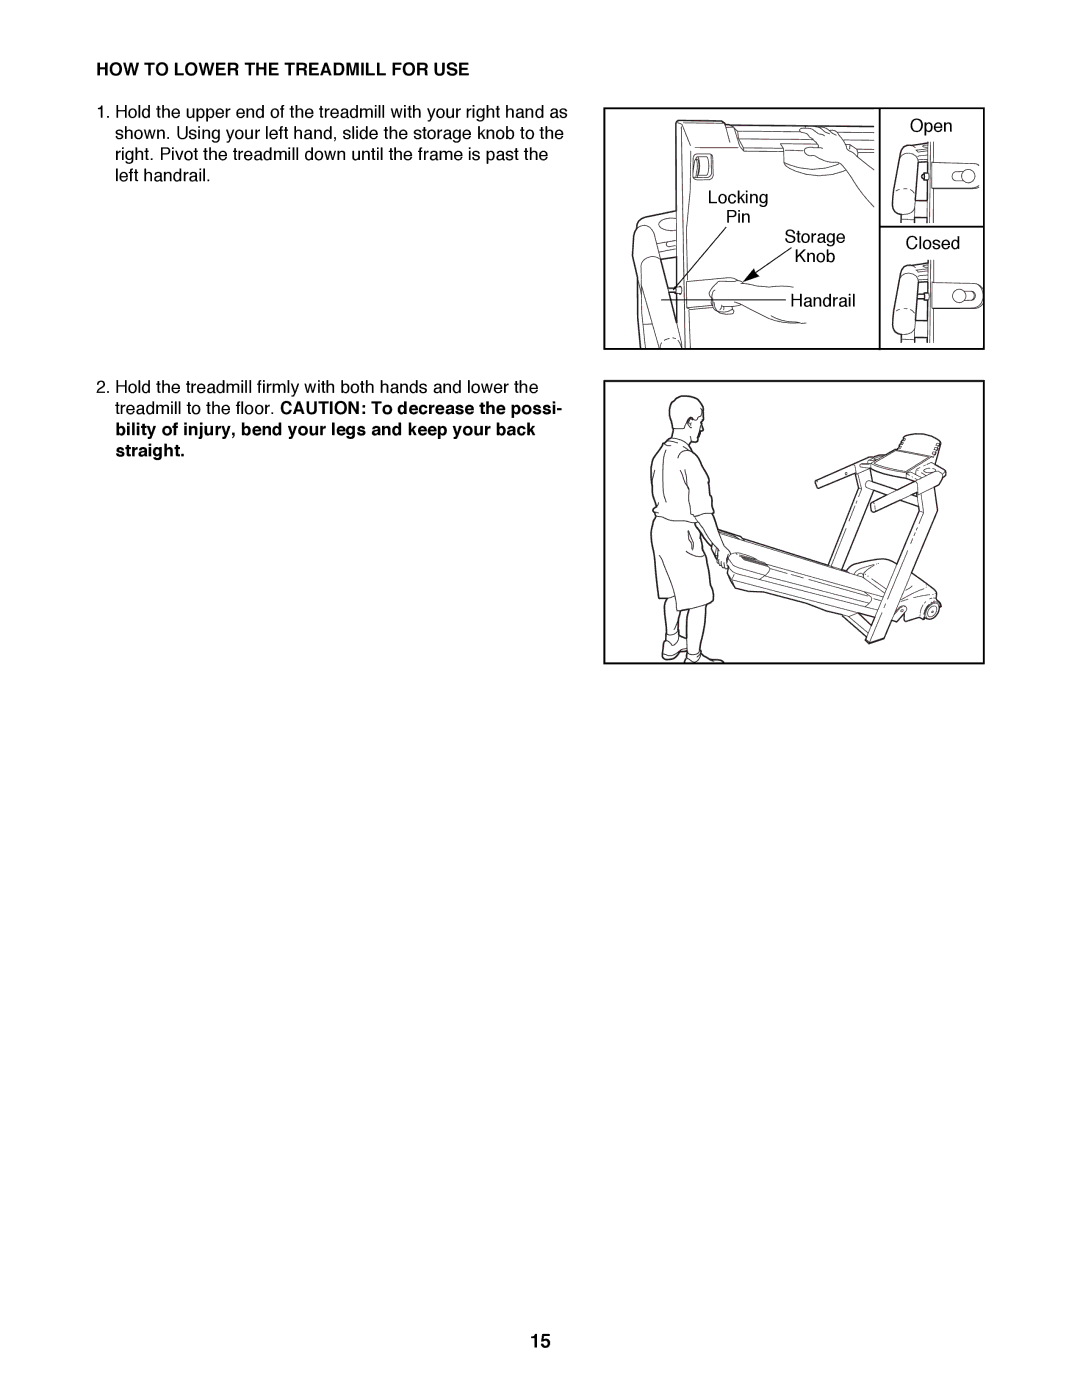 Reebok Fitness RBTL11980 manual HOW to Lower the Treadmill for USE 